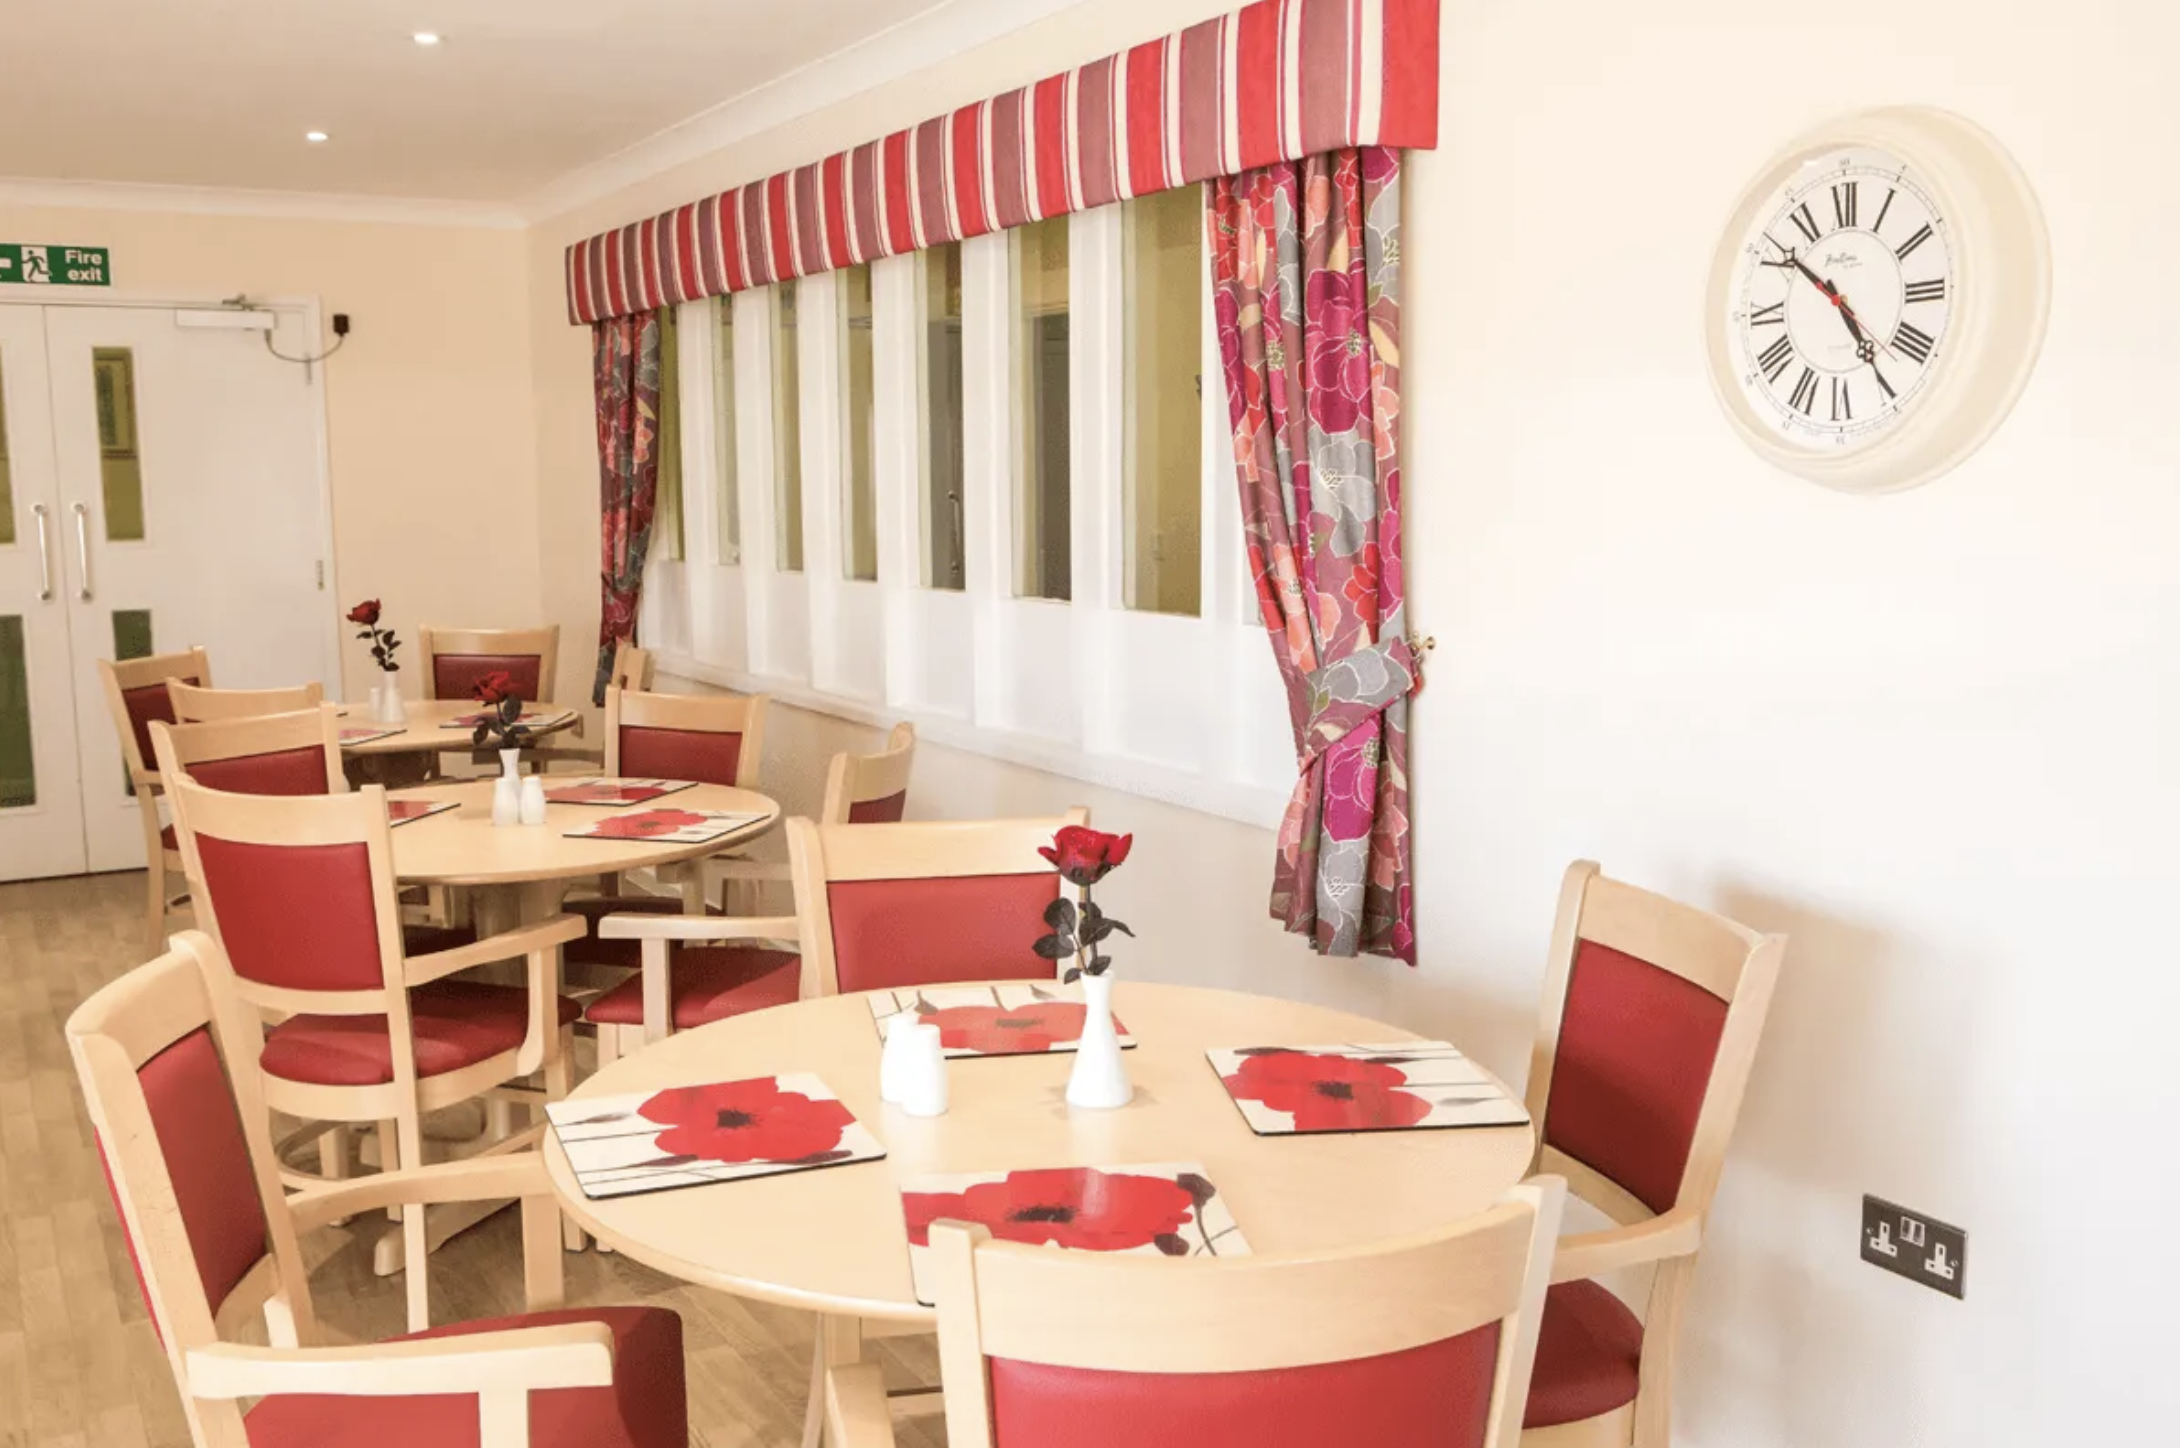 Dining room of Lincoln House care home in Dereham, Norfolk